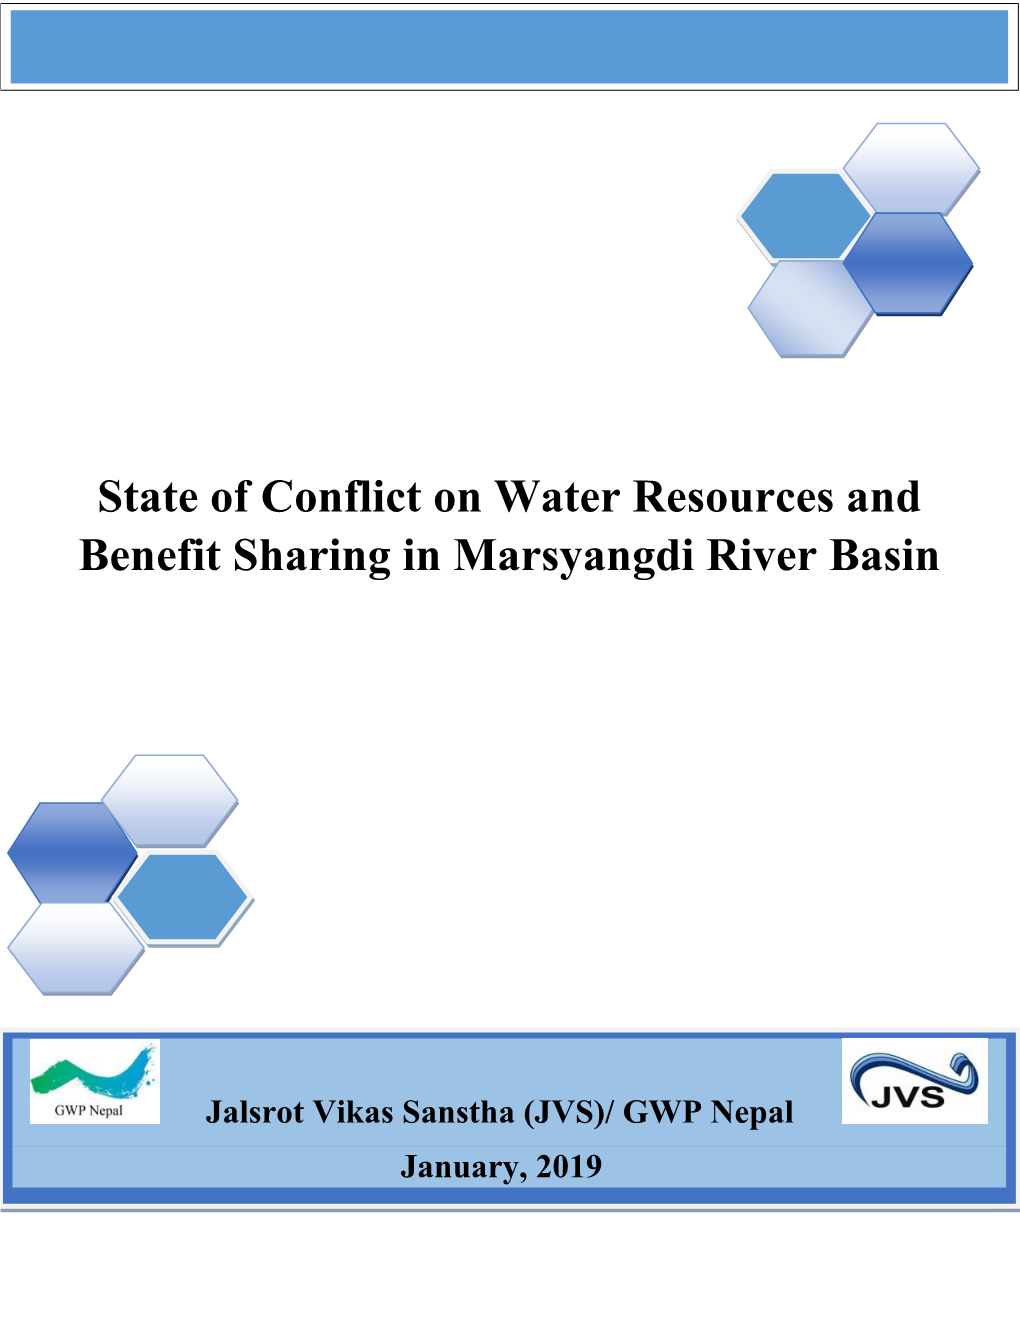 State of Conflict on Water Resourcs and Benefit Sharing in Marsyangdi